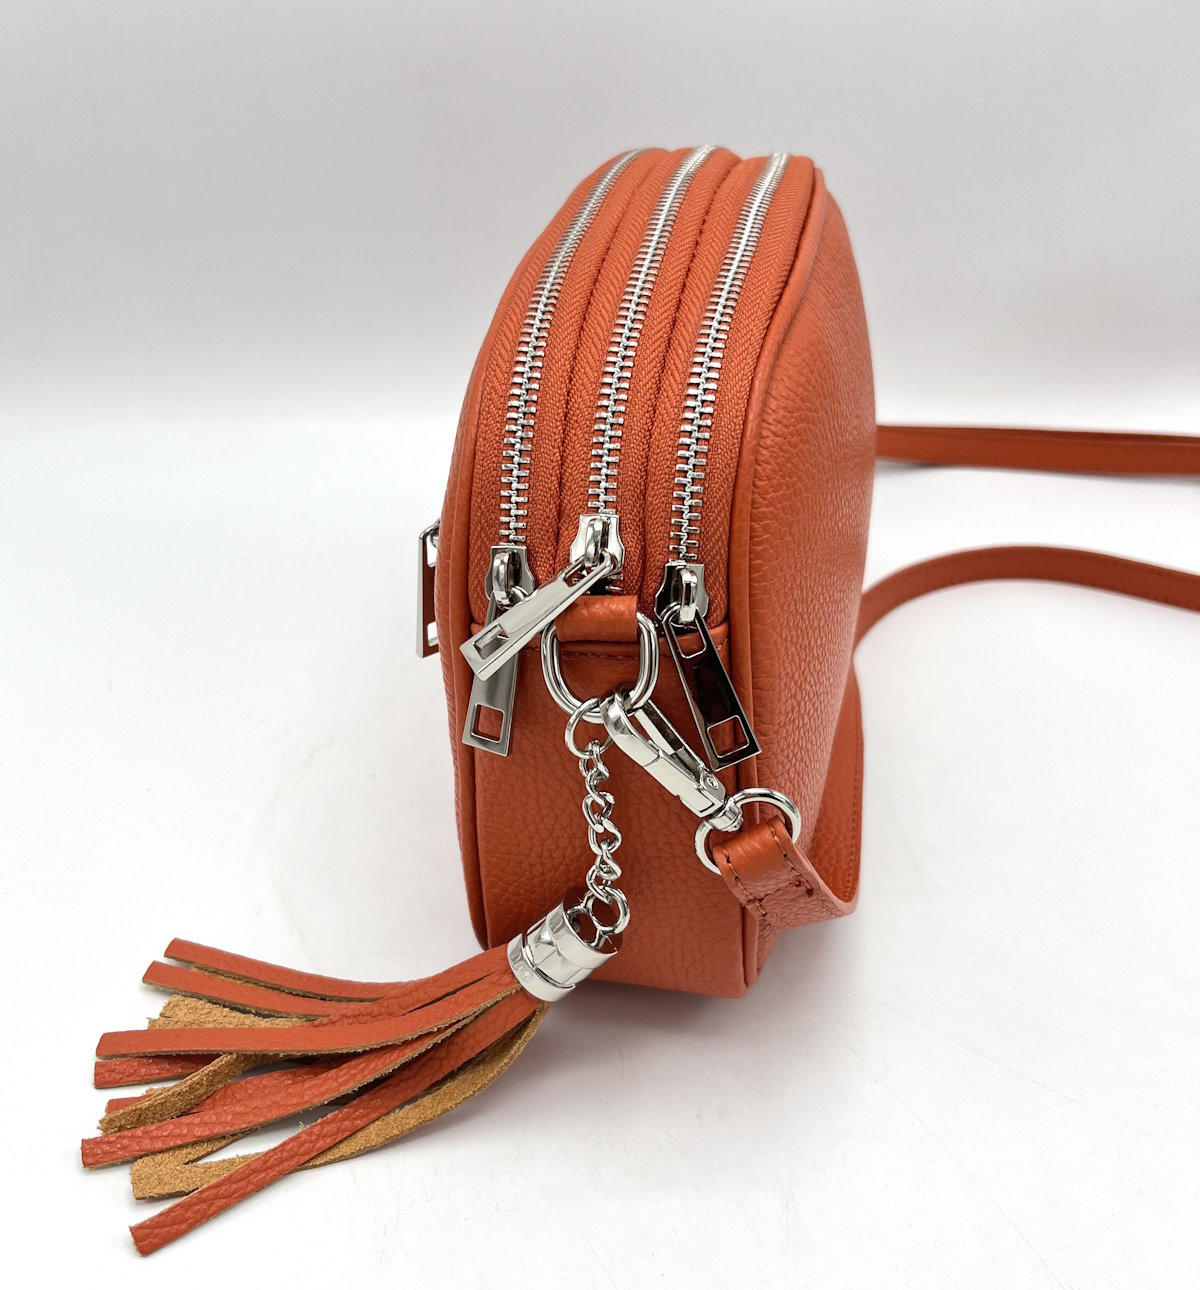 Genuine leather shoulder bag, for women, made in Italy, art. 112416.412